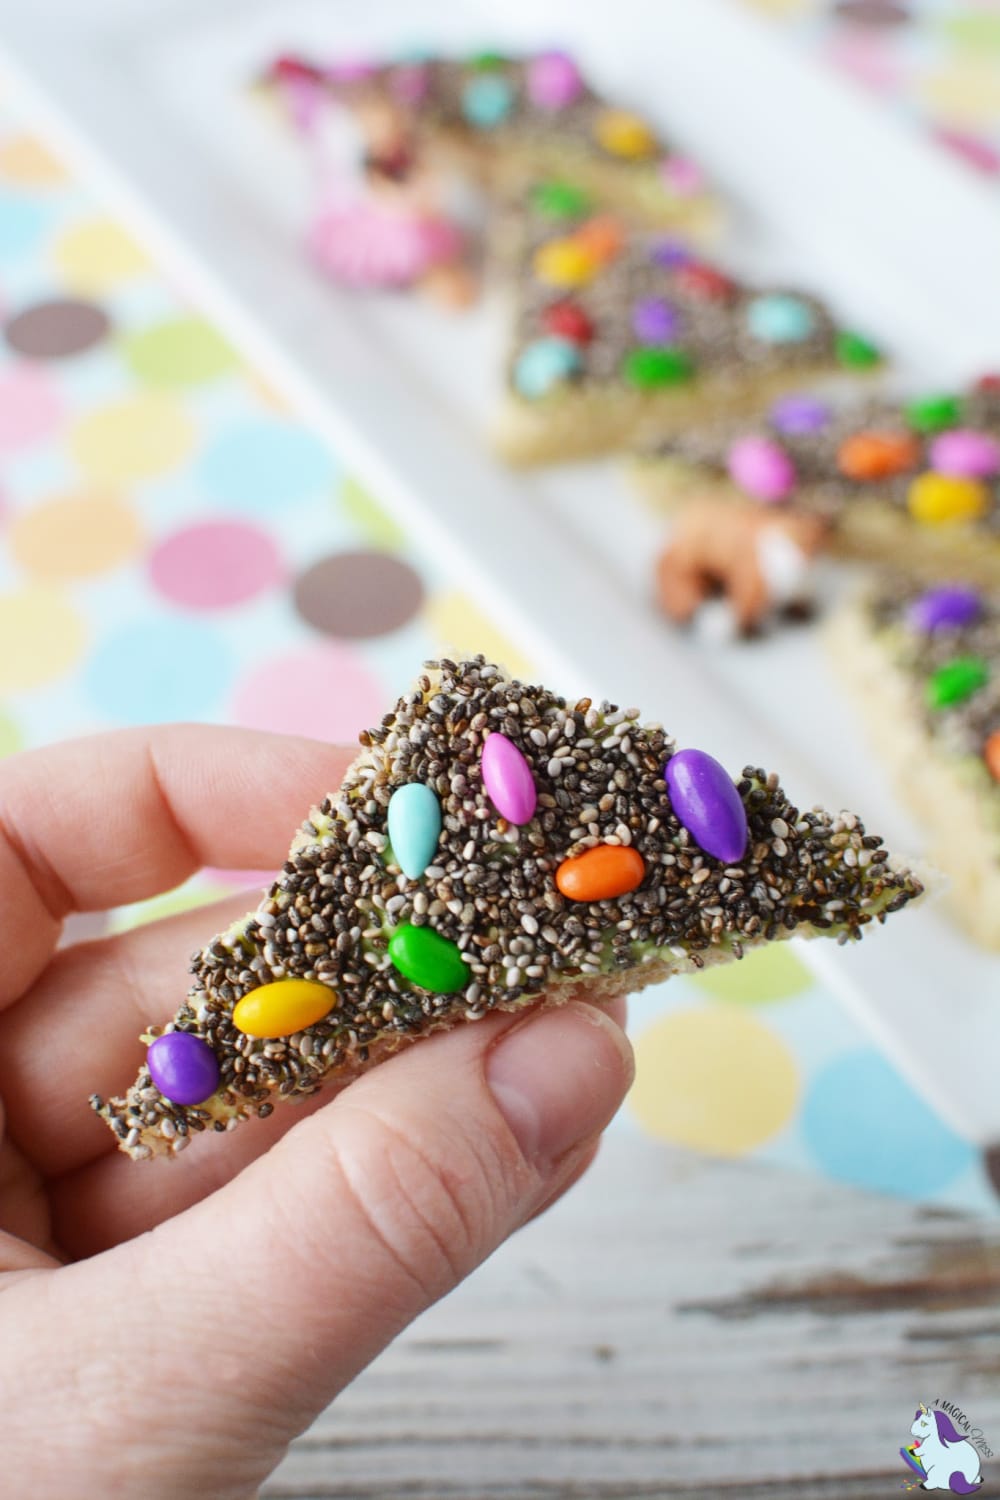 Super easy, yummy, and nutritious fairy bread.